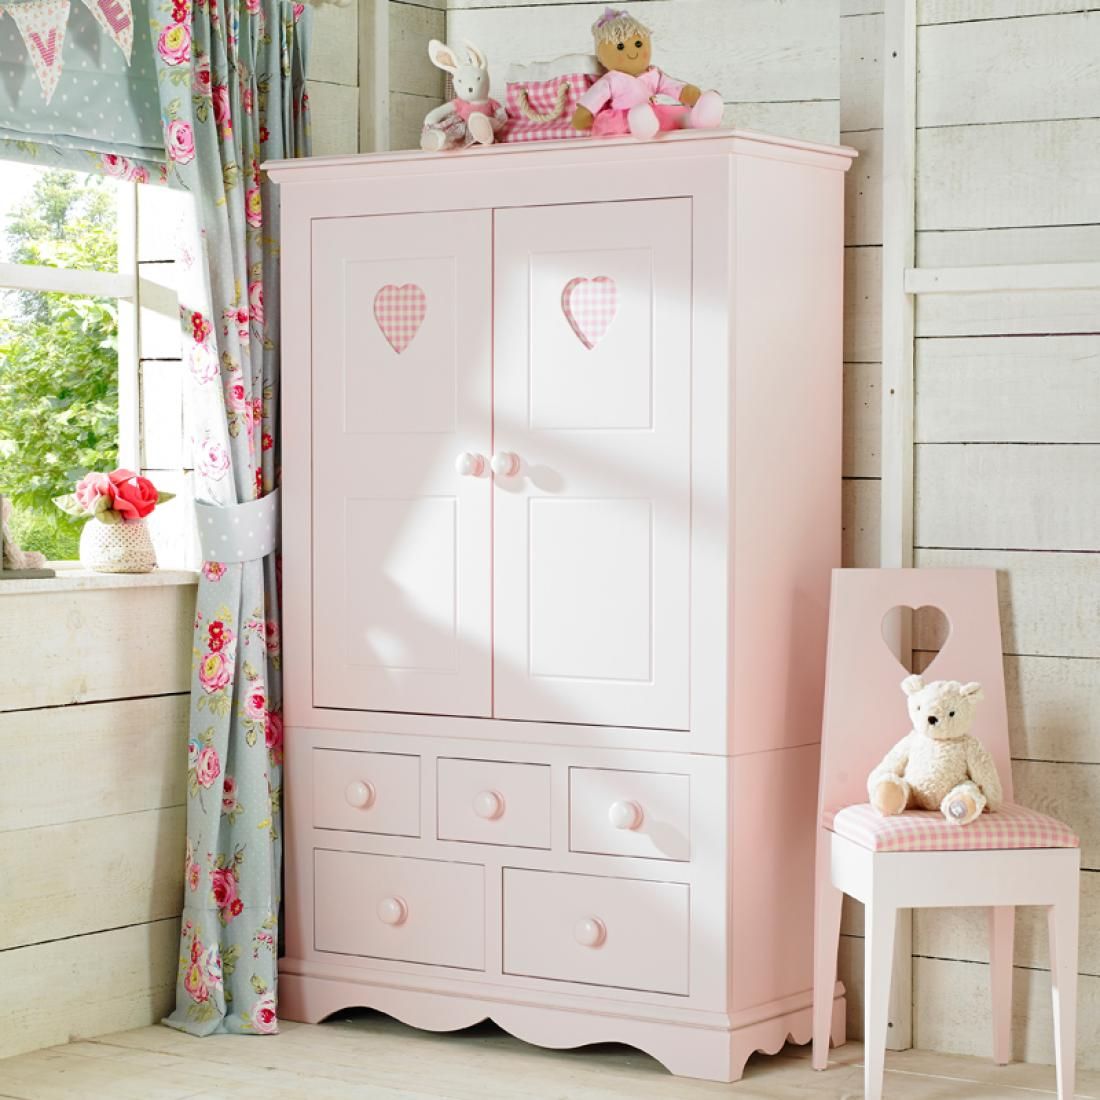 Looby Lou Combination Wardrobe | Childrens Wardrobe | Girls Wardrobe In Girls Wardrobes (View 2 of 15)